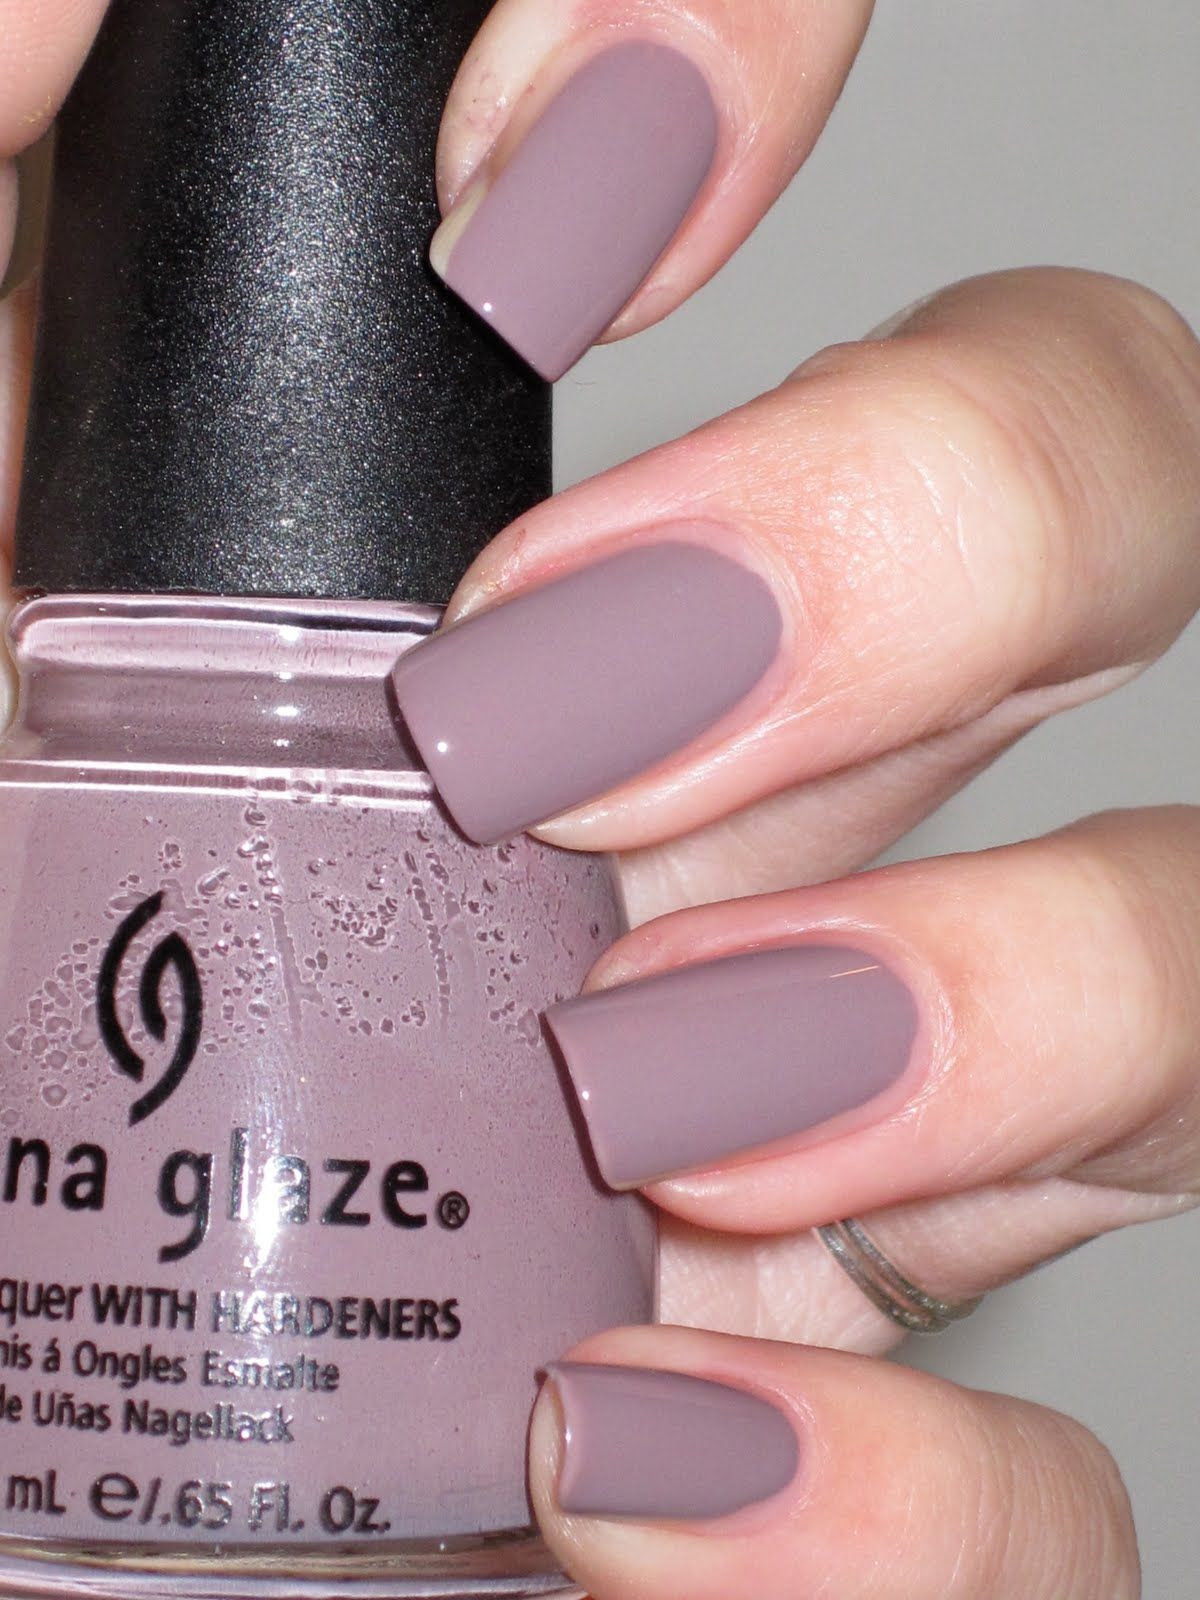 Nice Fall Nail Colors
 China Glaze Channelesque My favorite color just the